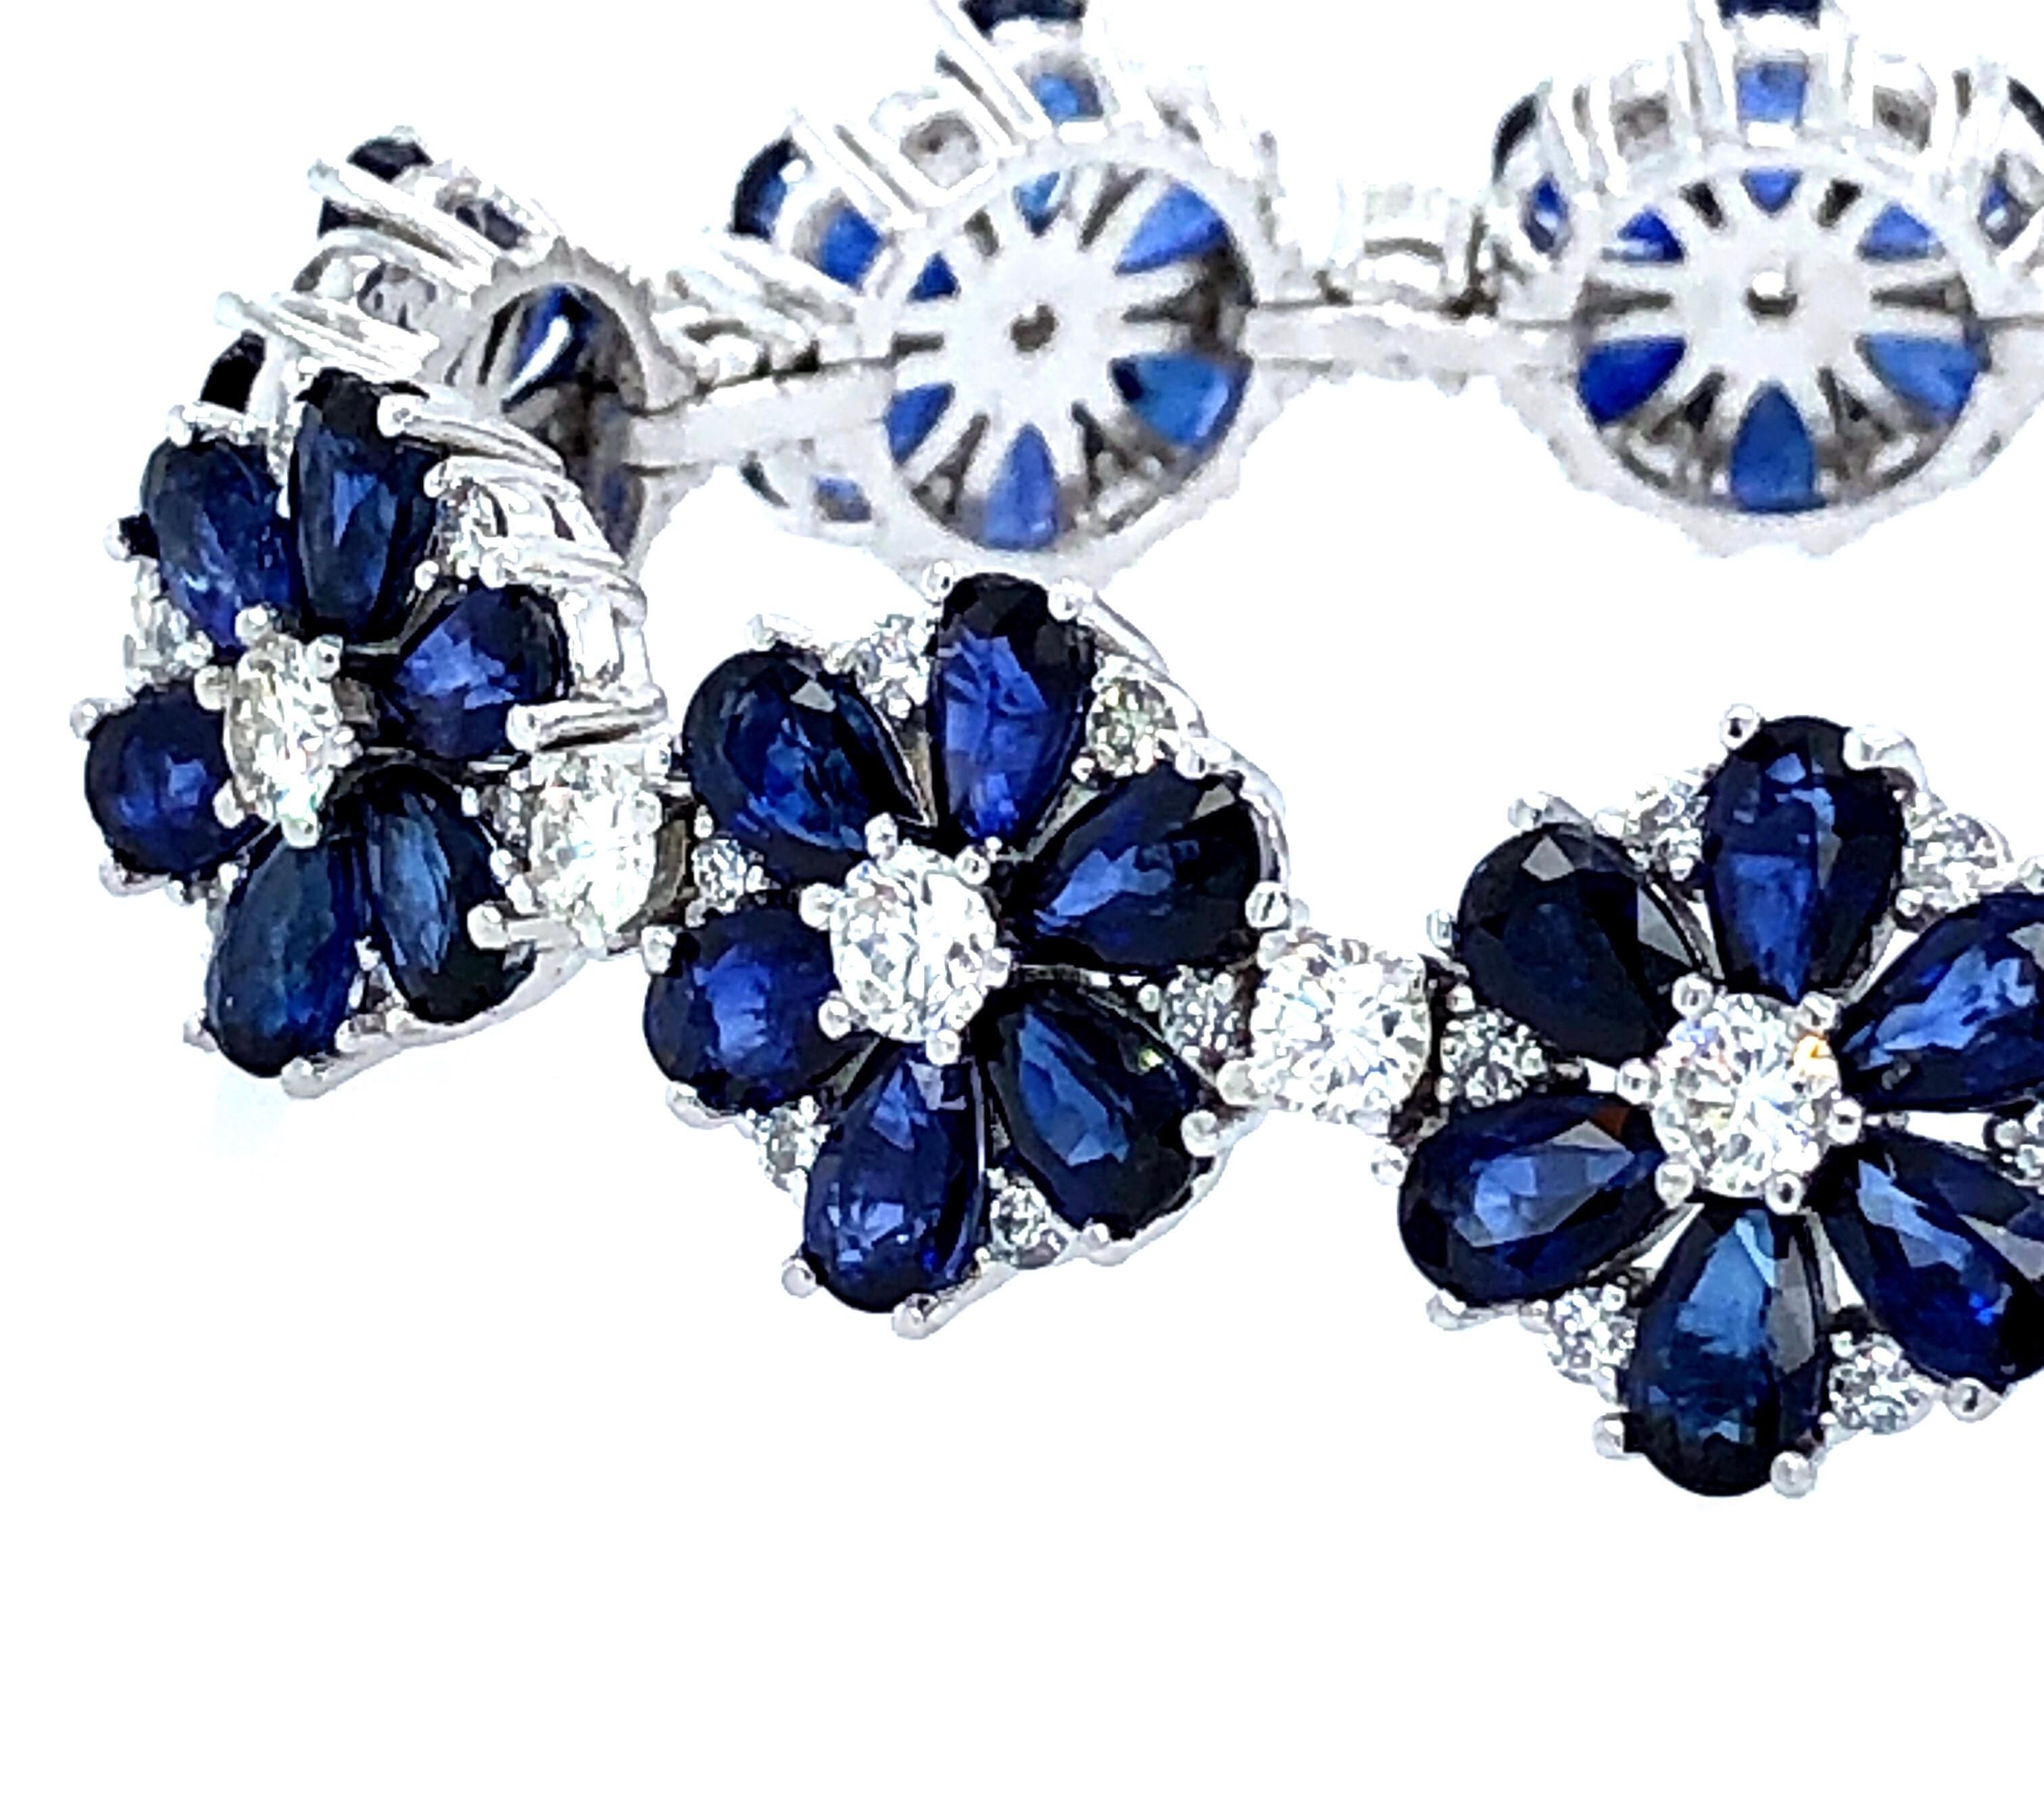 Offered here is a stunning sapphire and diamonds flower motif bracelet set in platinum. The bracelet has 14 links with all stones prong set. The bracelet has natural pear shape sapphires with a estimated total weight of 18 carats. The sapphires are